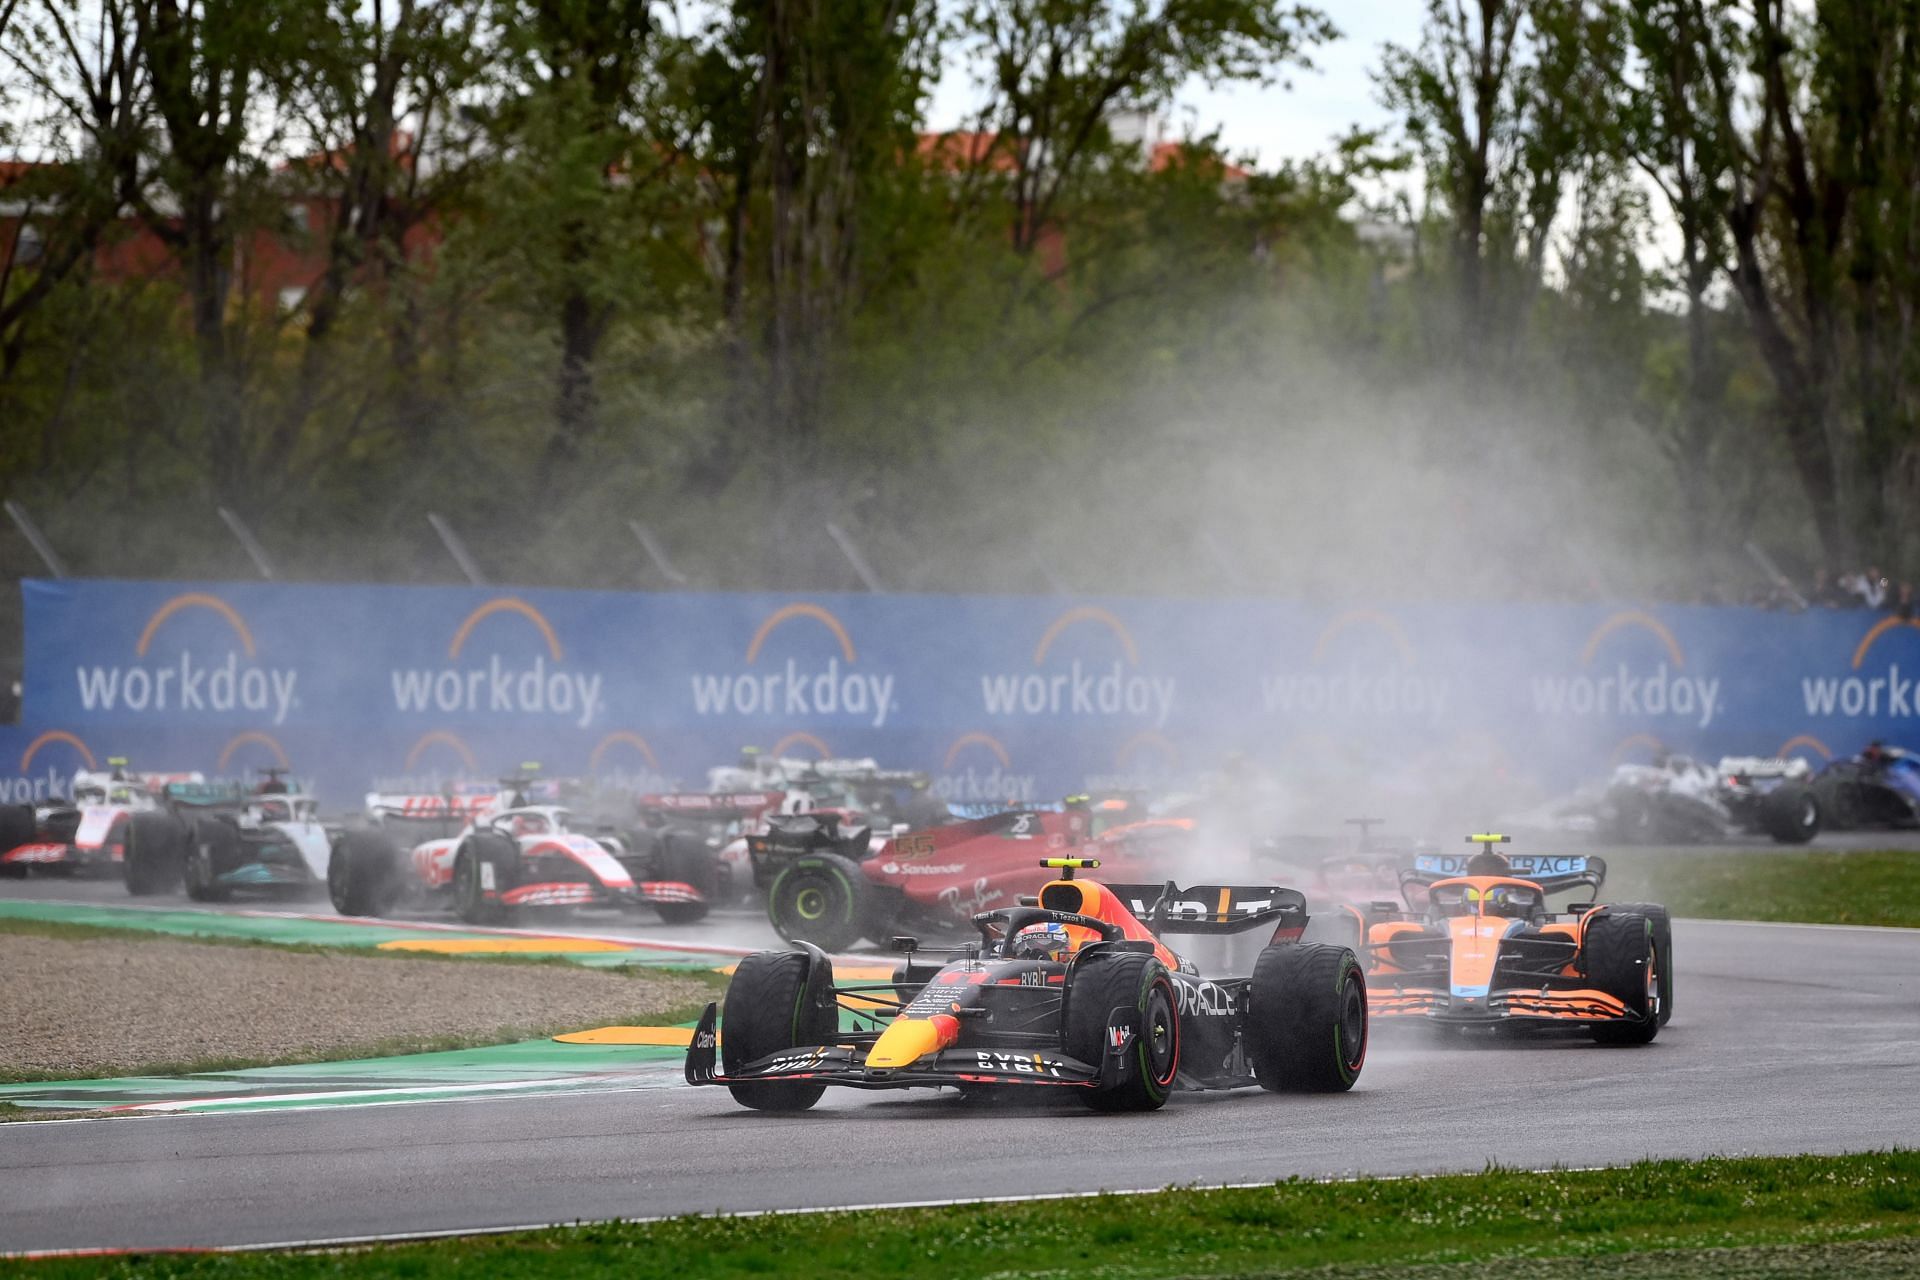 2023 F1 Emilia Romagna GP full schedule, timings, where to watch, and more explored